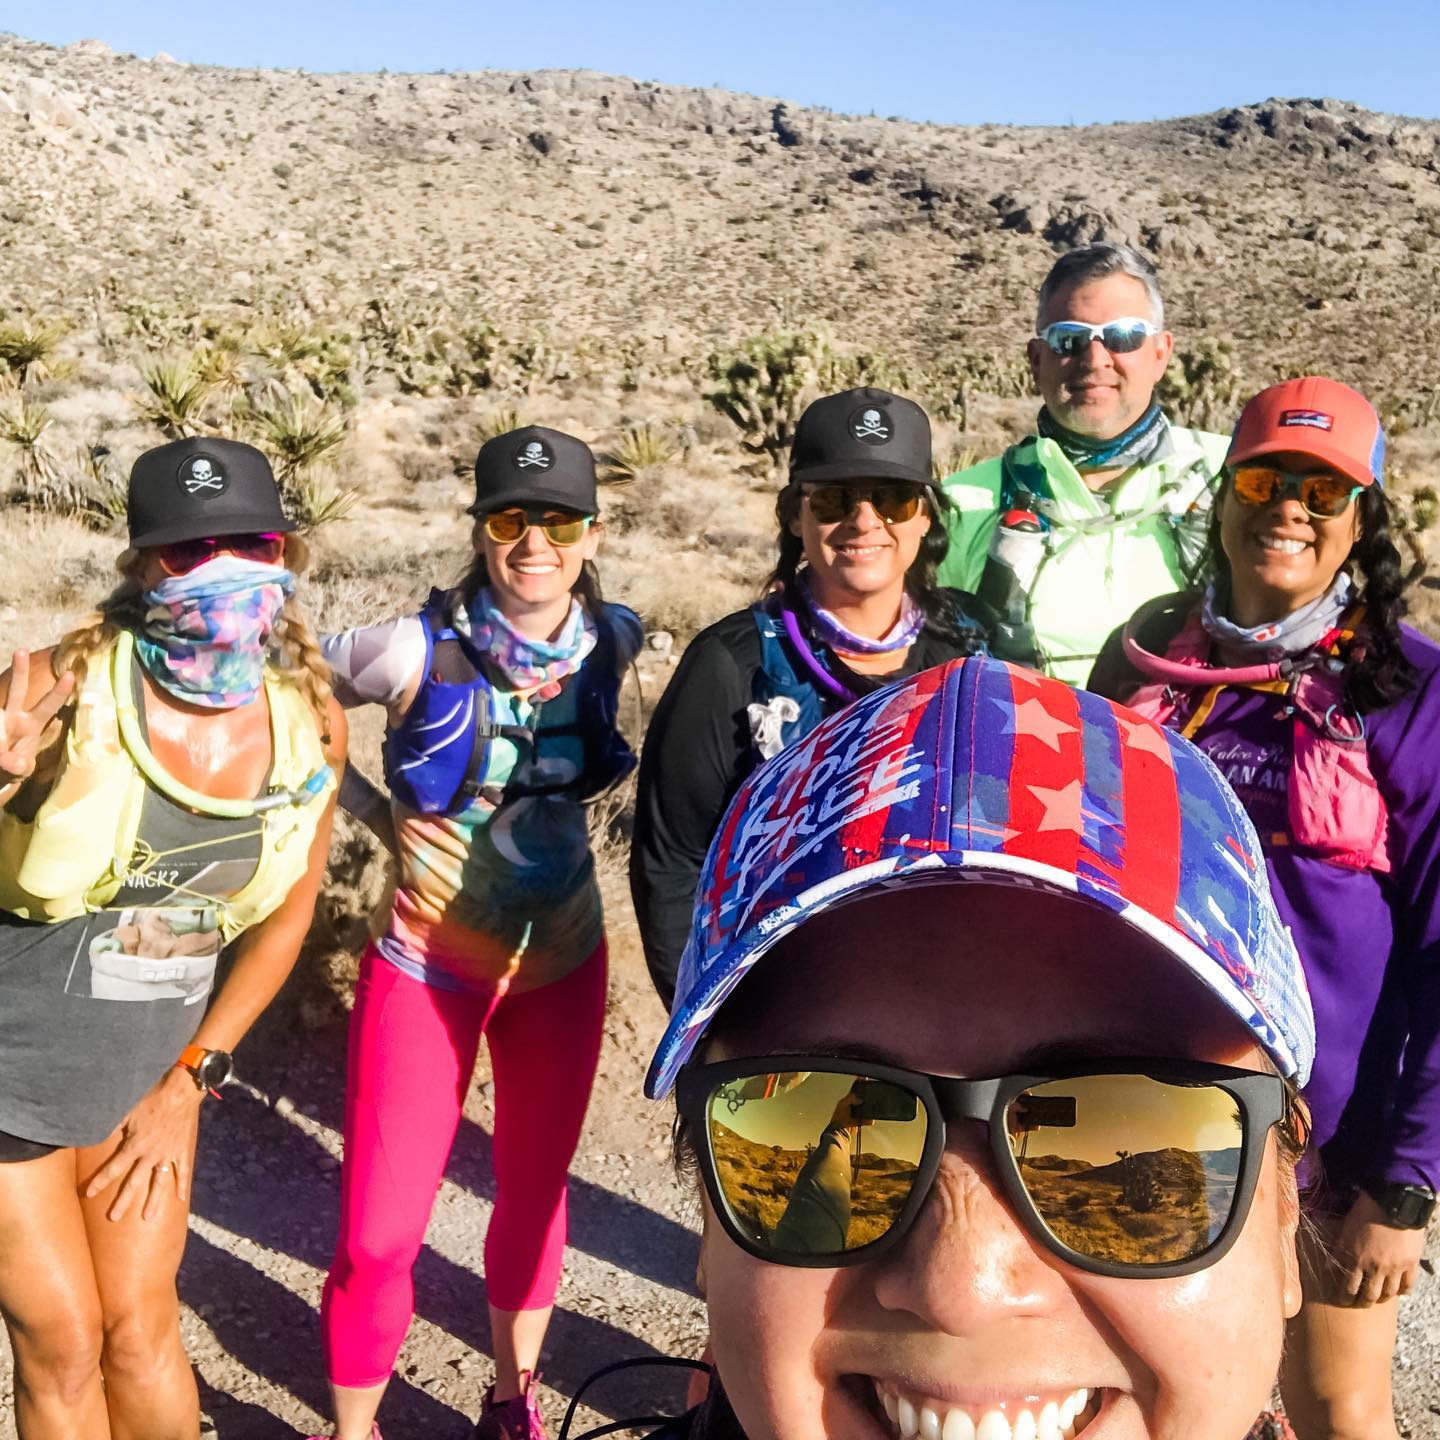 When Yoka mentioned that she and her hubs are doing a run from Late Night to Goodsprings on Sunday and we invite ourselves to their run 🤣 Bucket list item checked! Great fun, some misery, and then more laughs on the trails with these ladies & Sean 😎#trailrunningvegas #baseperformance #teamultra #michelobultra #risingmountainscoaching [instagram]